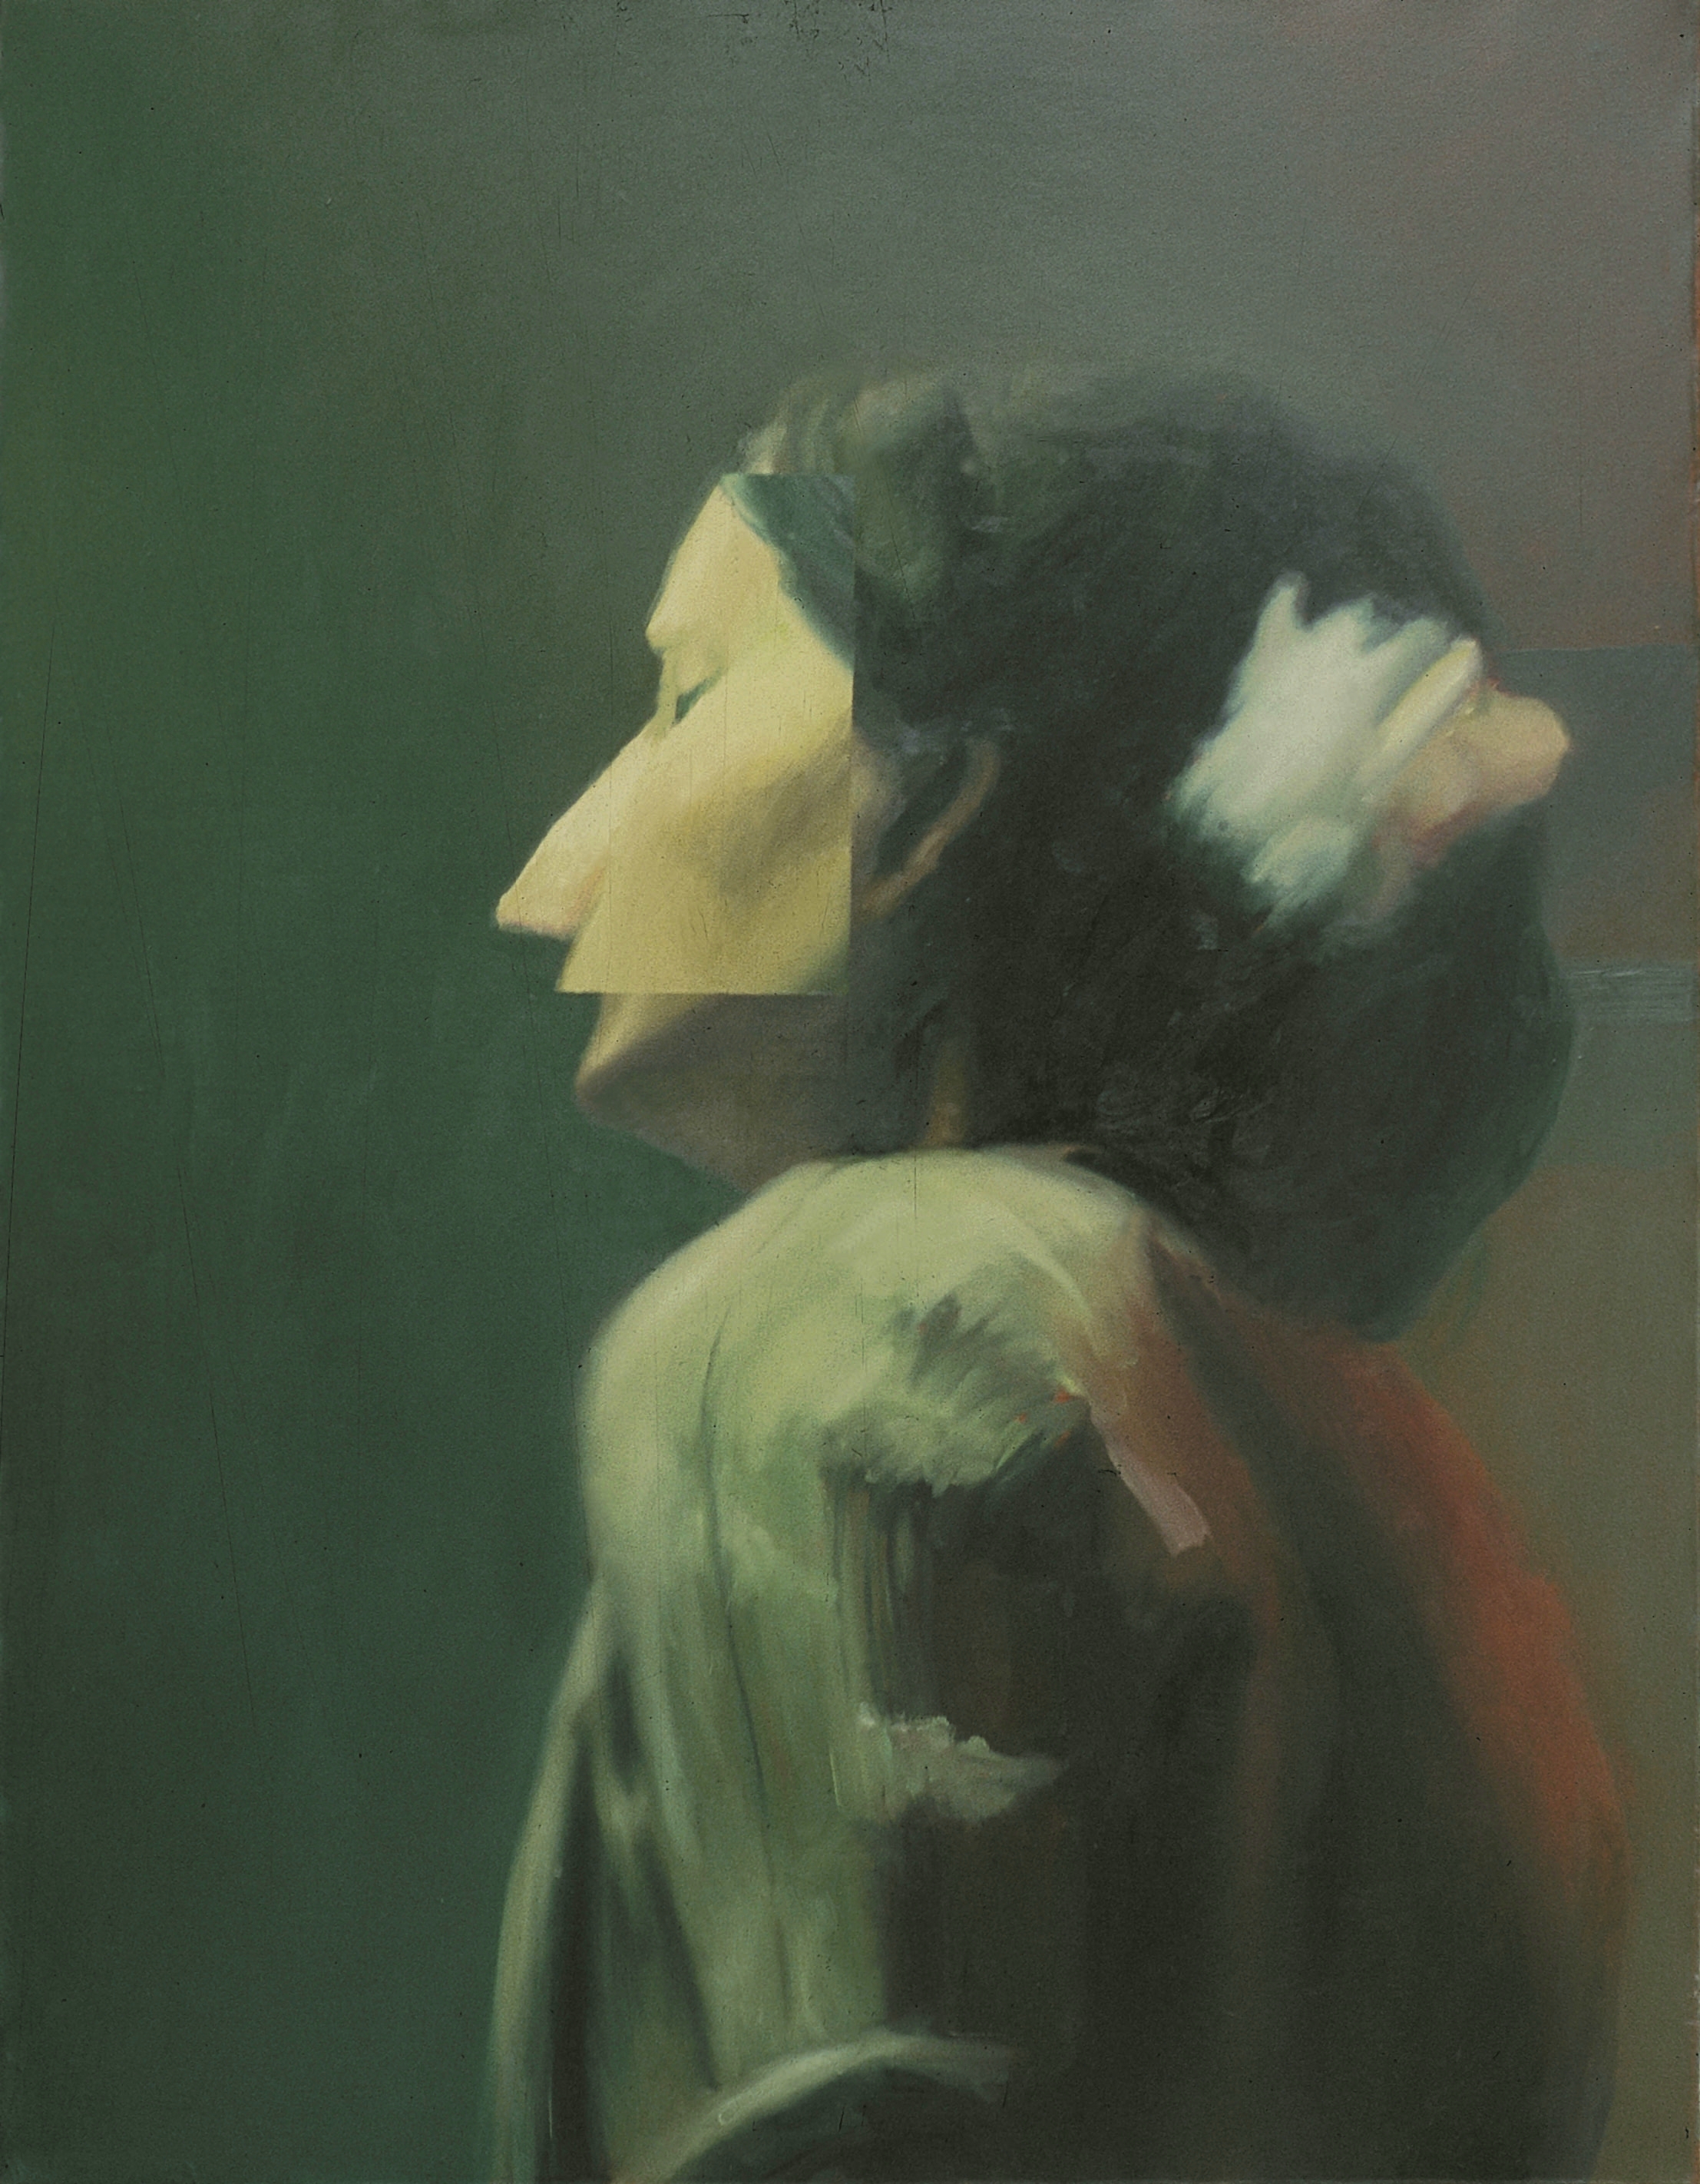   LALA , 1999, oil on canvas, 120 x 80cm. Private collection, France 